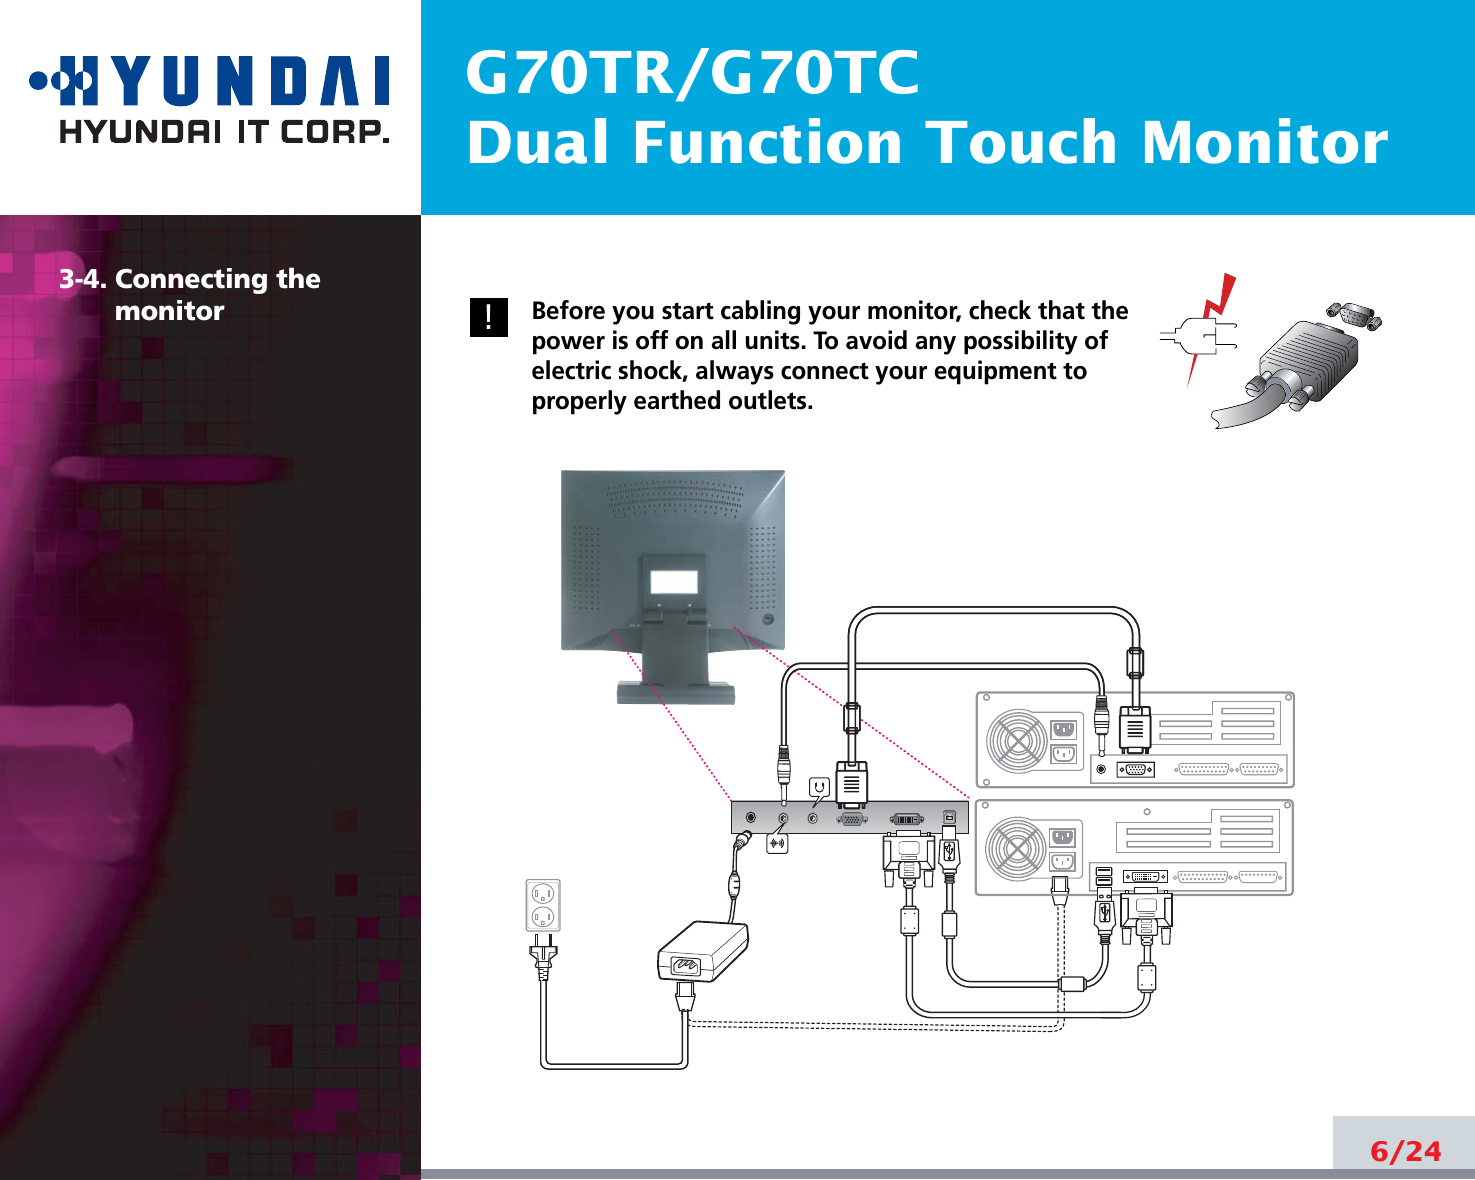 G70TR/G70TCDual Function Touch Monitor3-4. Connecting the monitor Before you start cabling your monitor, check that thepower is off on all units. To avoid any possibility ofelectric shock, always connect your equipment toproperly earthed outlets.6/24!!